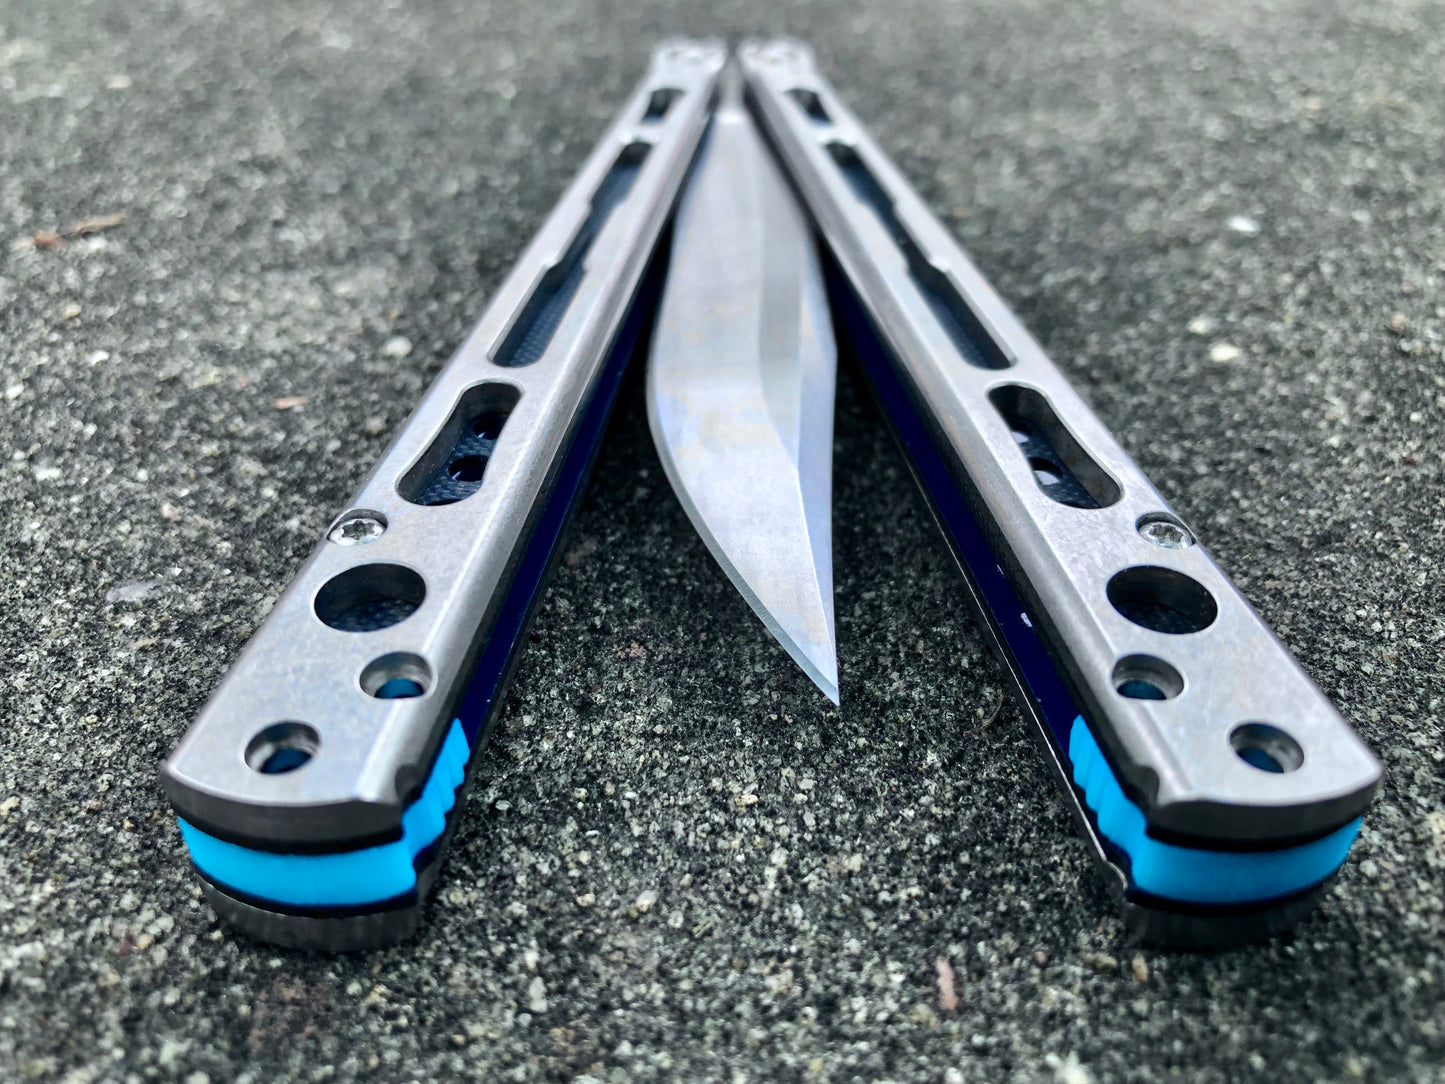 Make your HOM Chimera balisong a more neutral flipper with Zippy spacers: full-length spacers with jimping, or spring-latch spacers that counterweight the safe handle for improved balance.